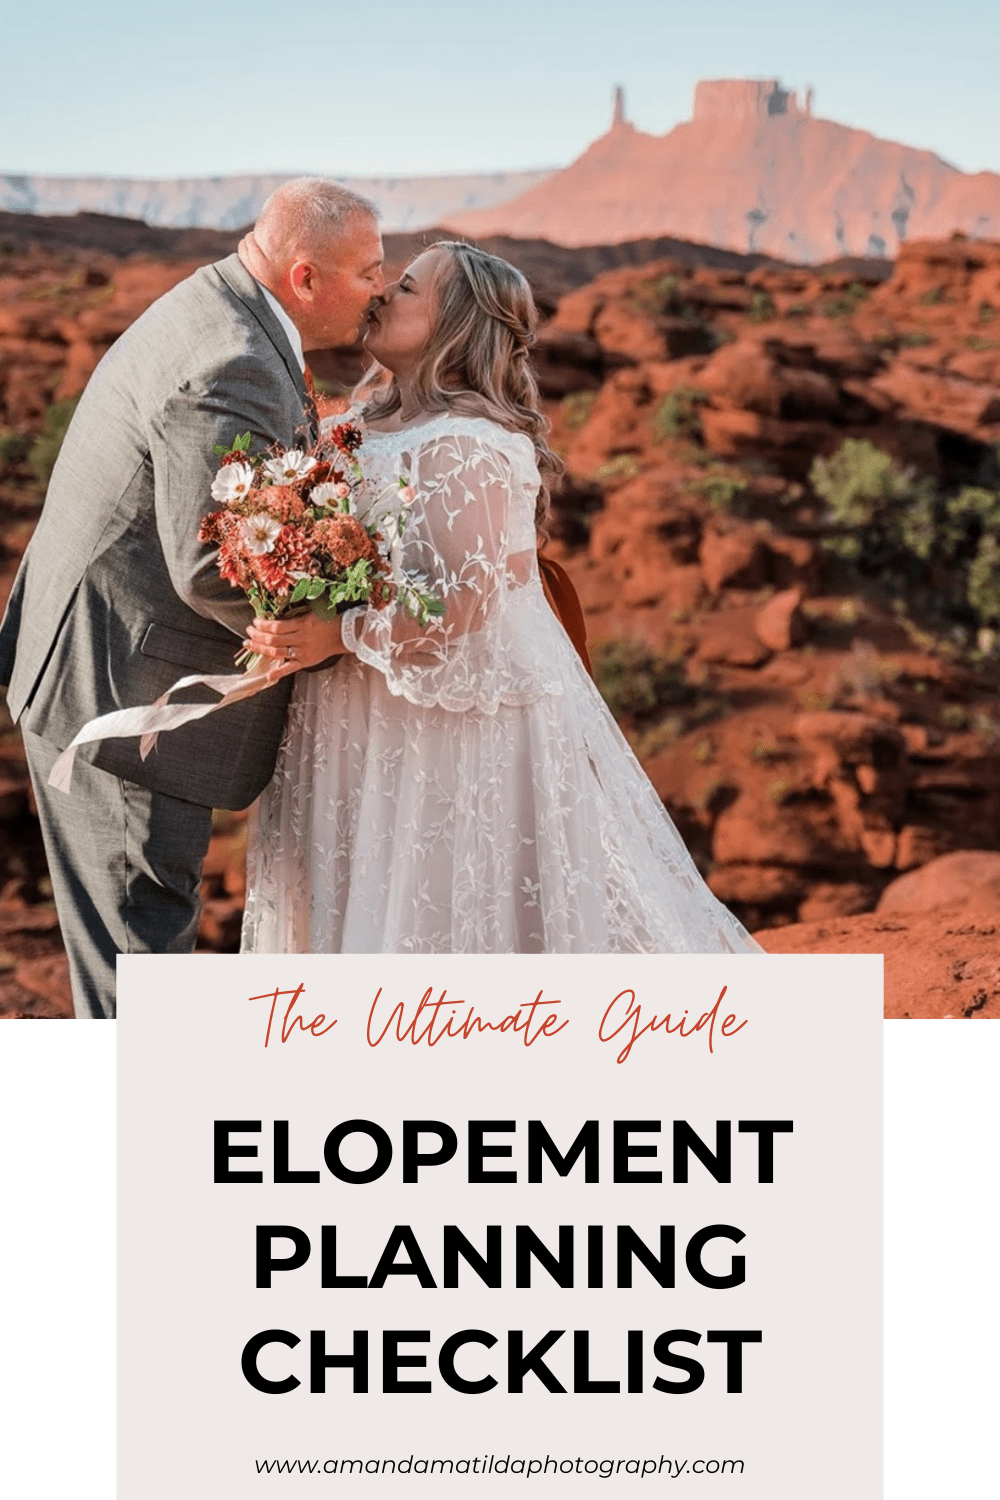 Ultimate Elopement Planning Guide & Checklist from Amanda Matilda Photography